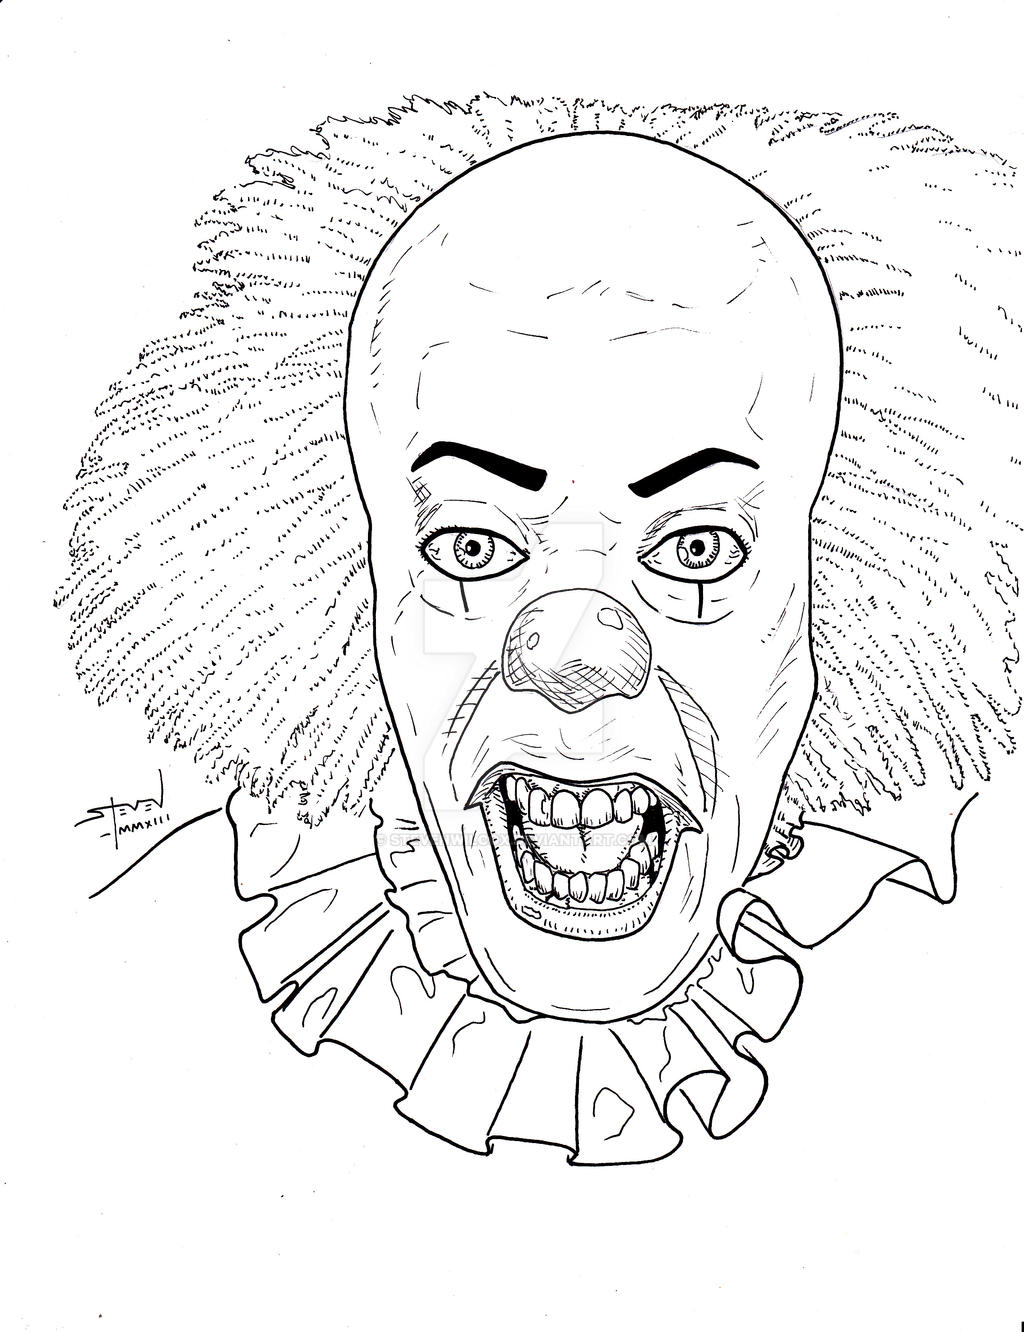 Pennywise the Clown by StevenWilcox on DeviantArt